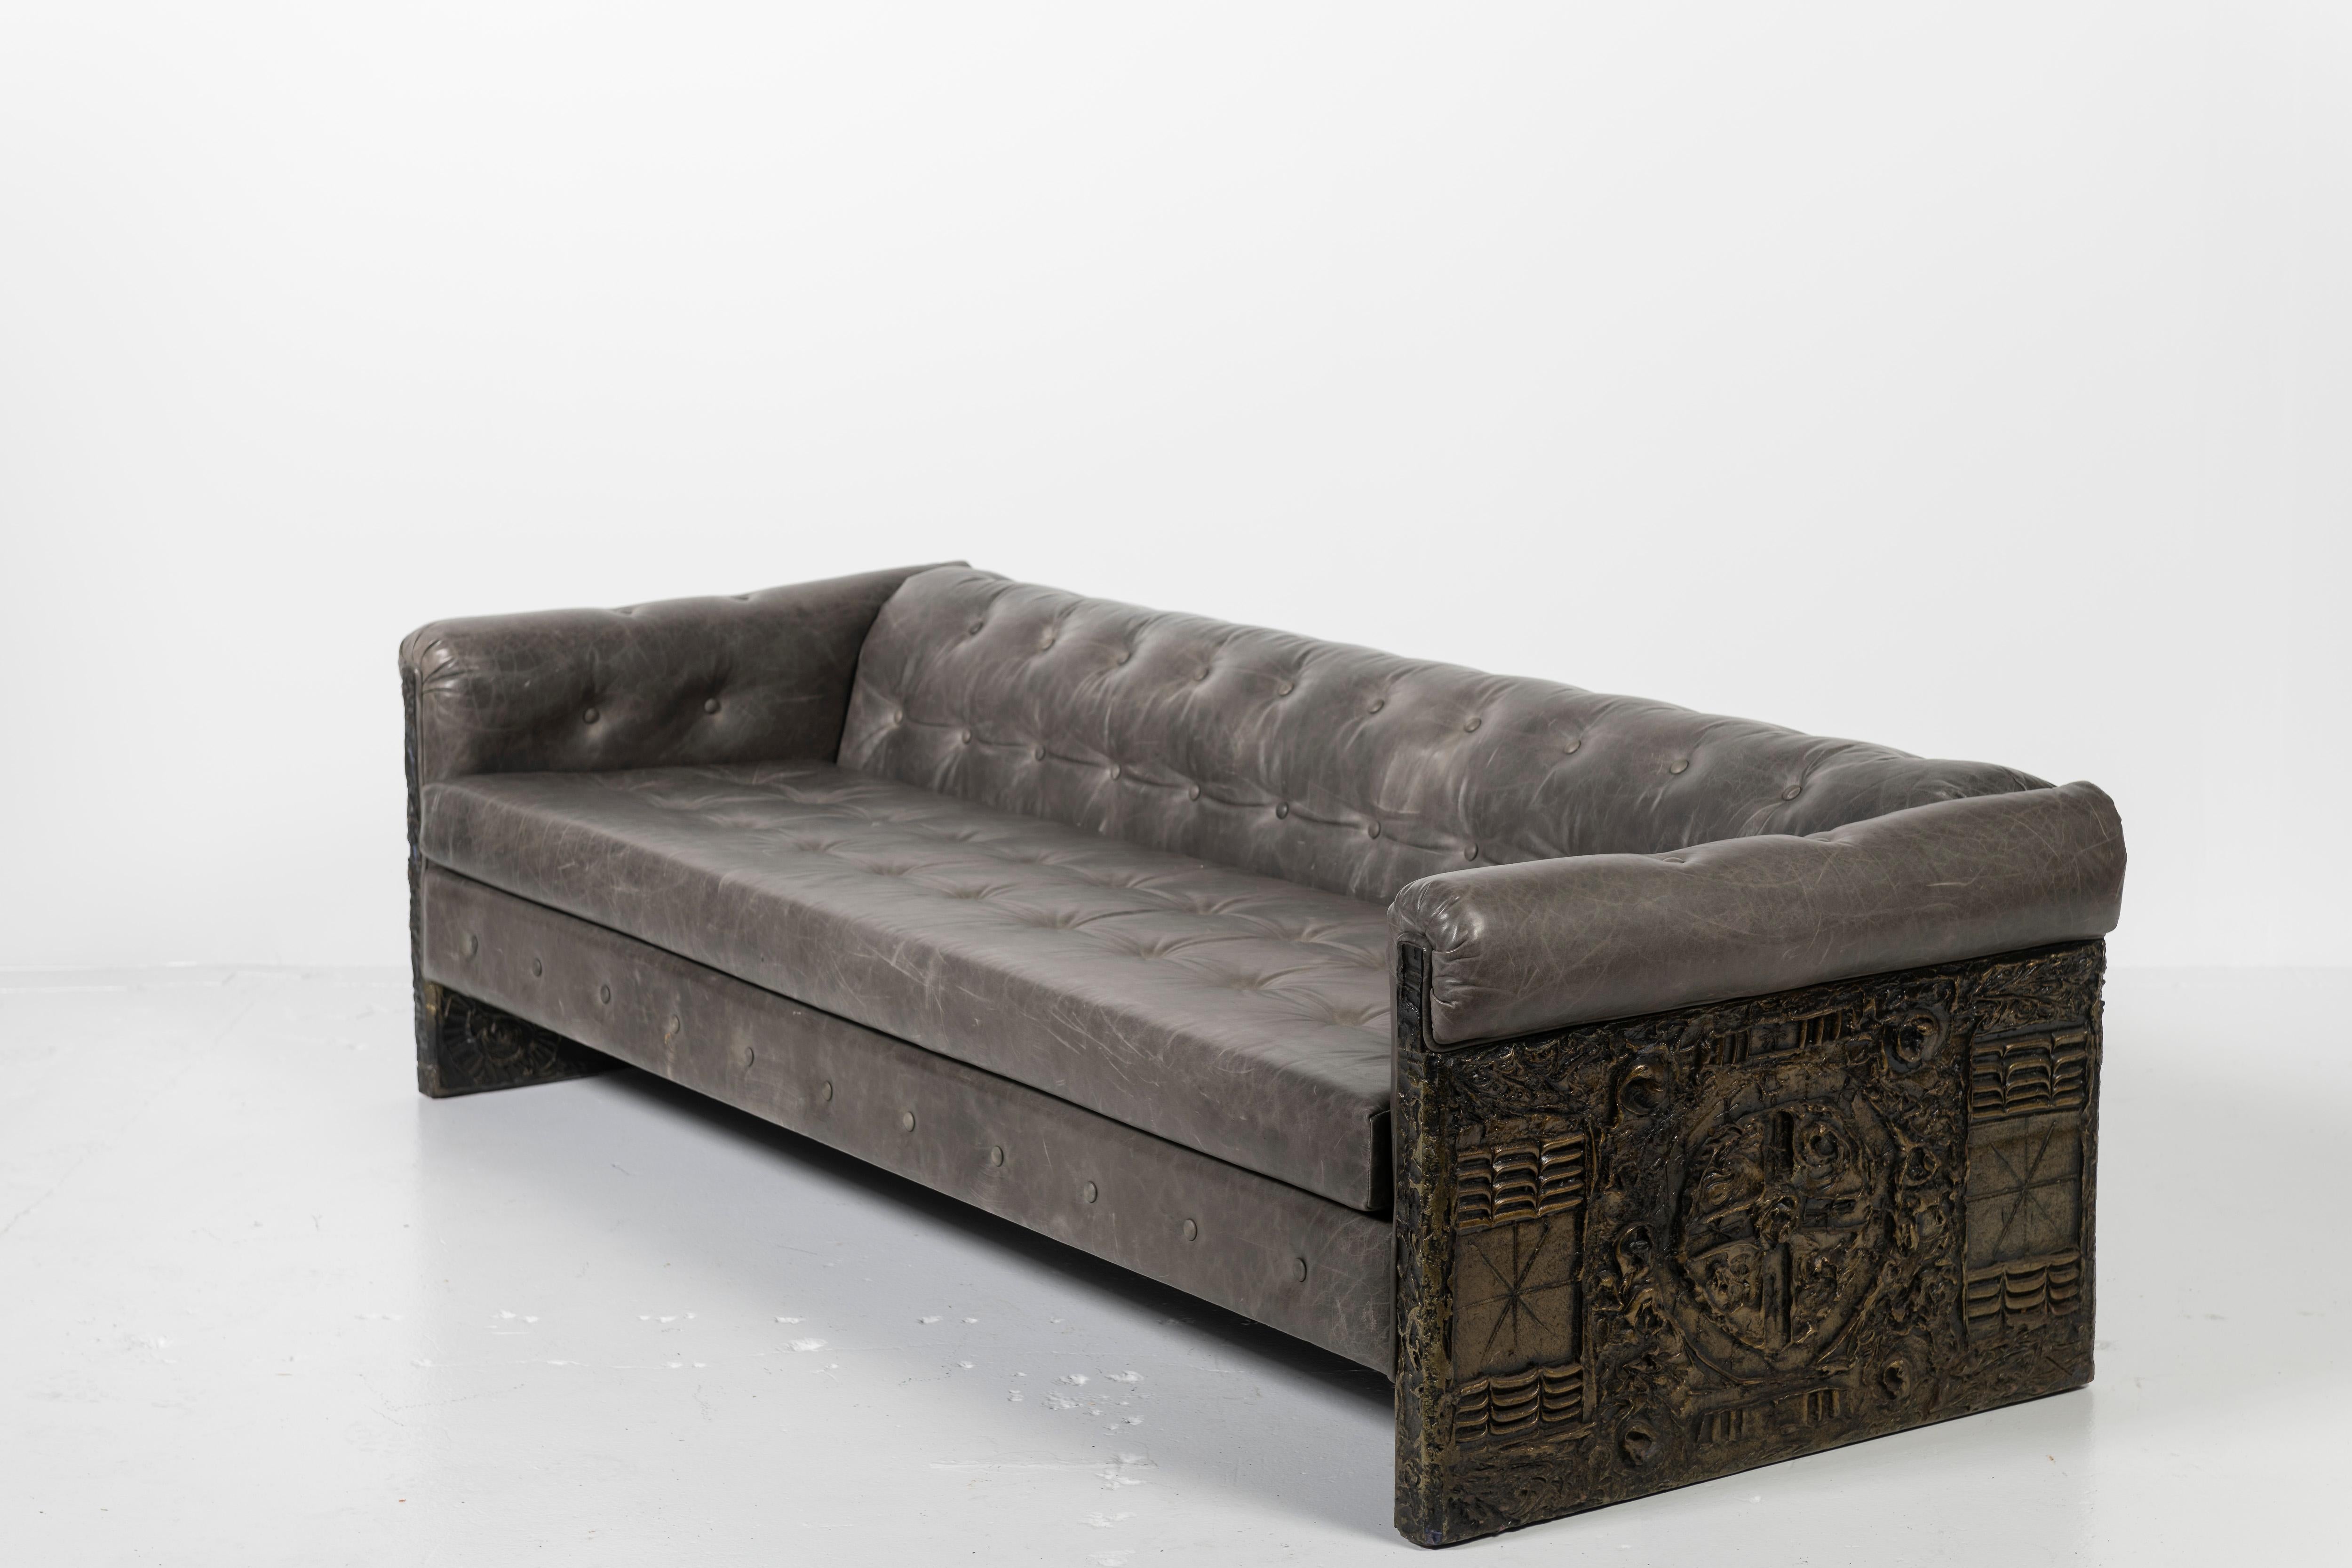 20th Century Adrian Pearsall Tufted Leather Sofa with Bronzed Resin over Steel Sides